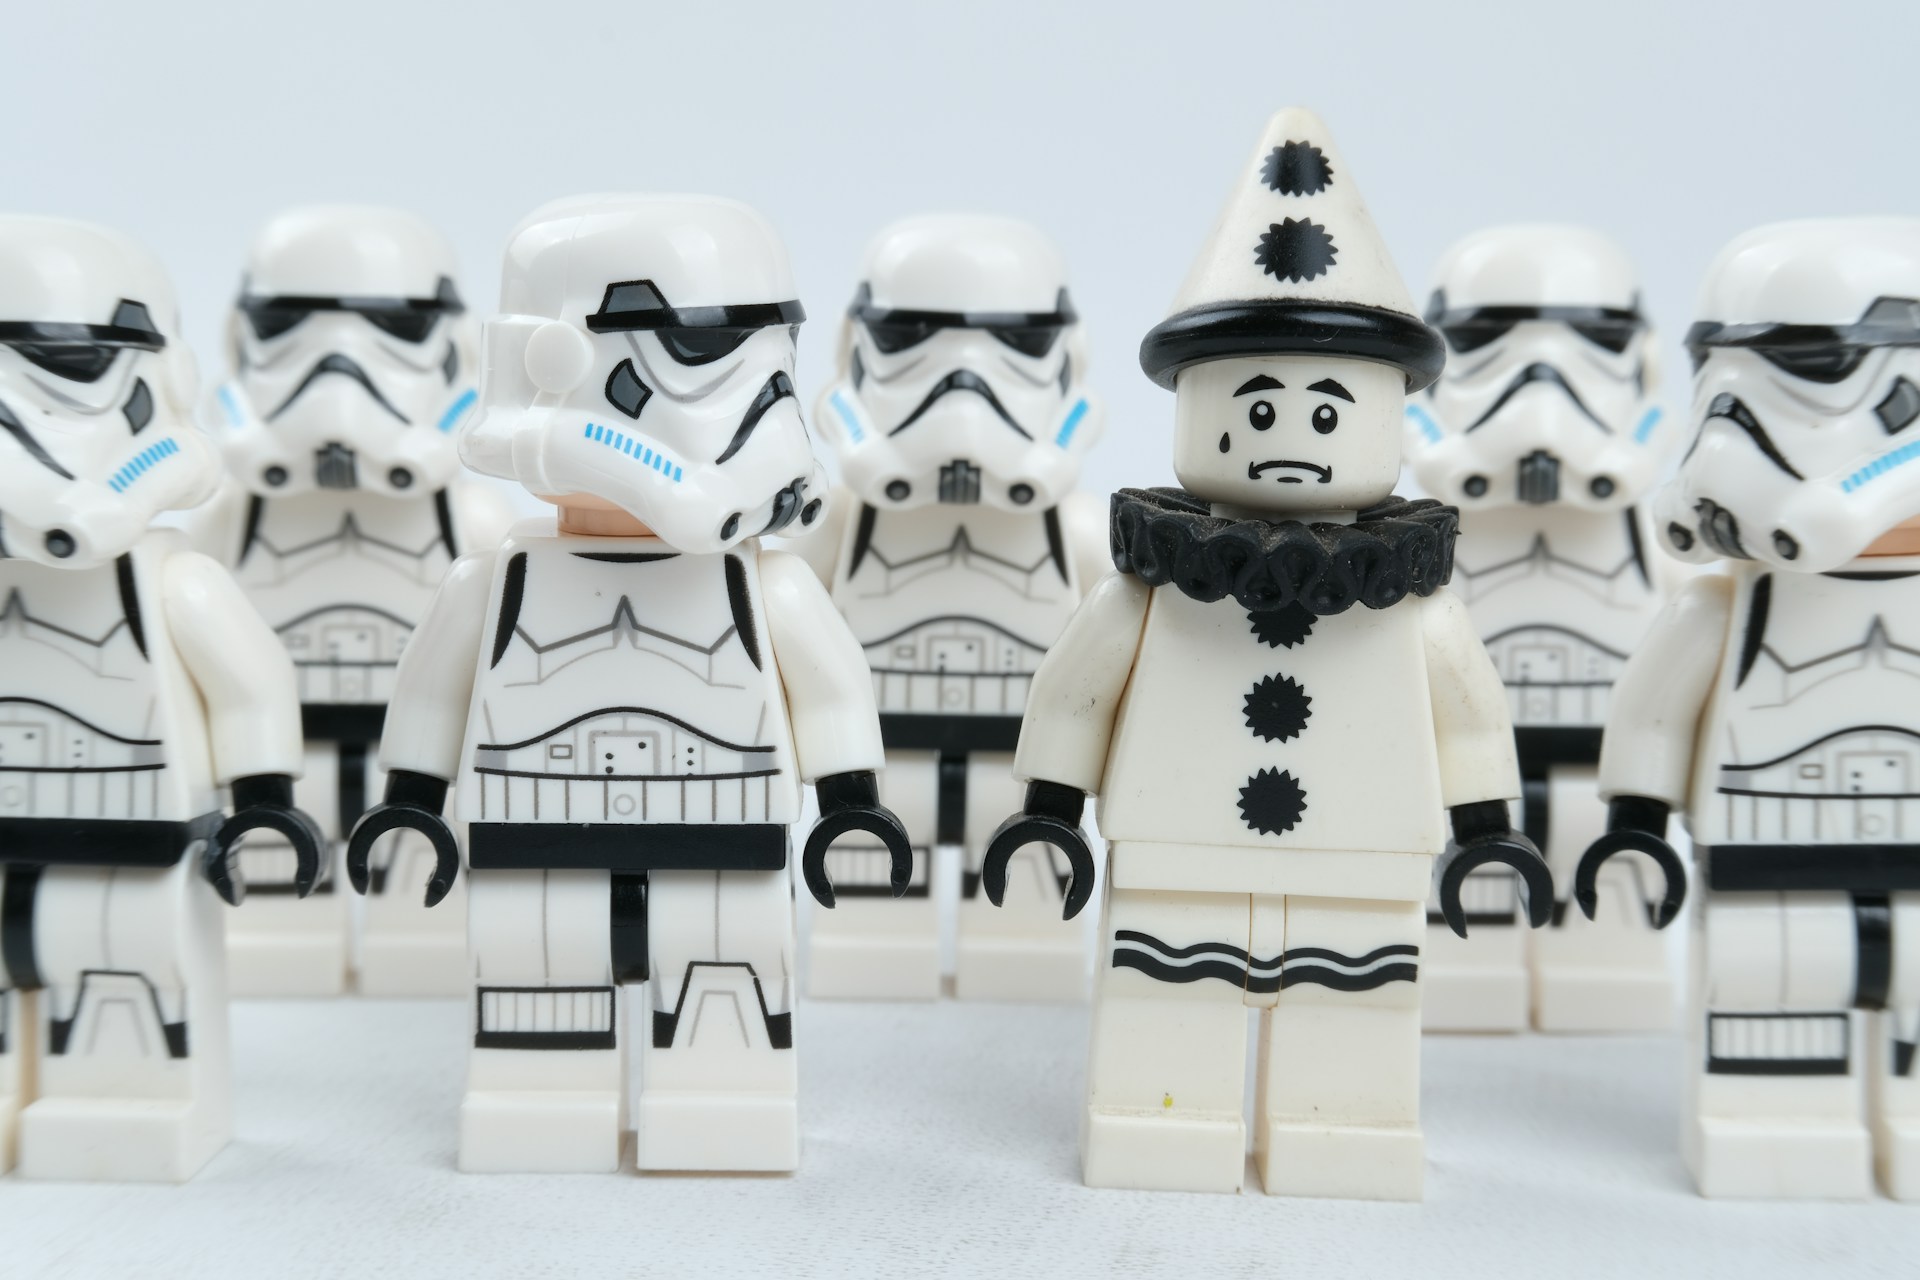 A group of Lego Stormtroopers and one solo Lego Pierrot clown in the middle